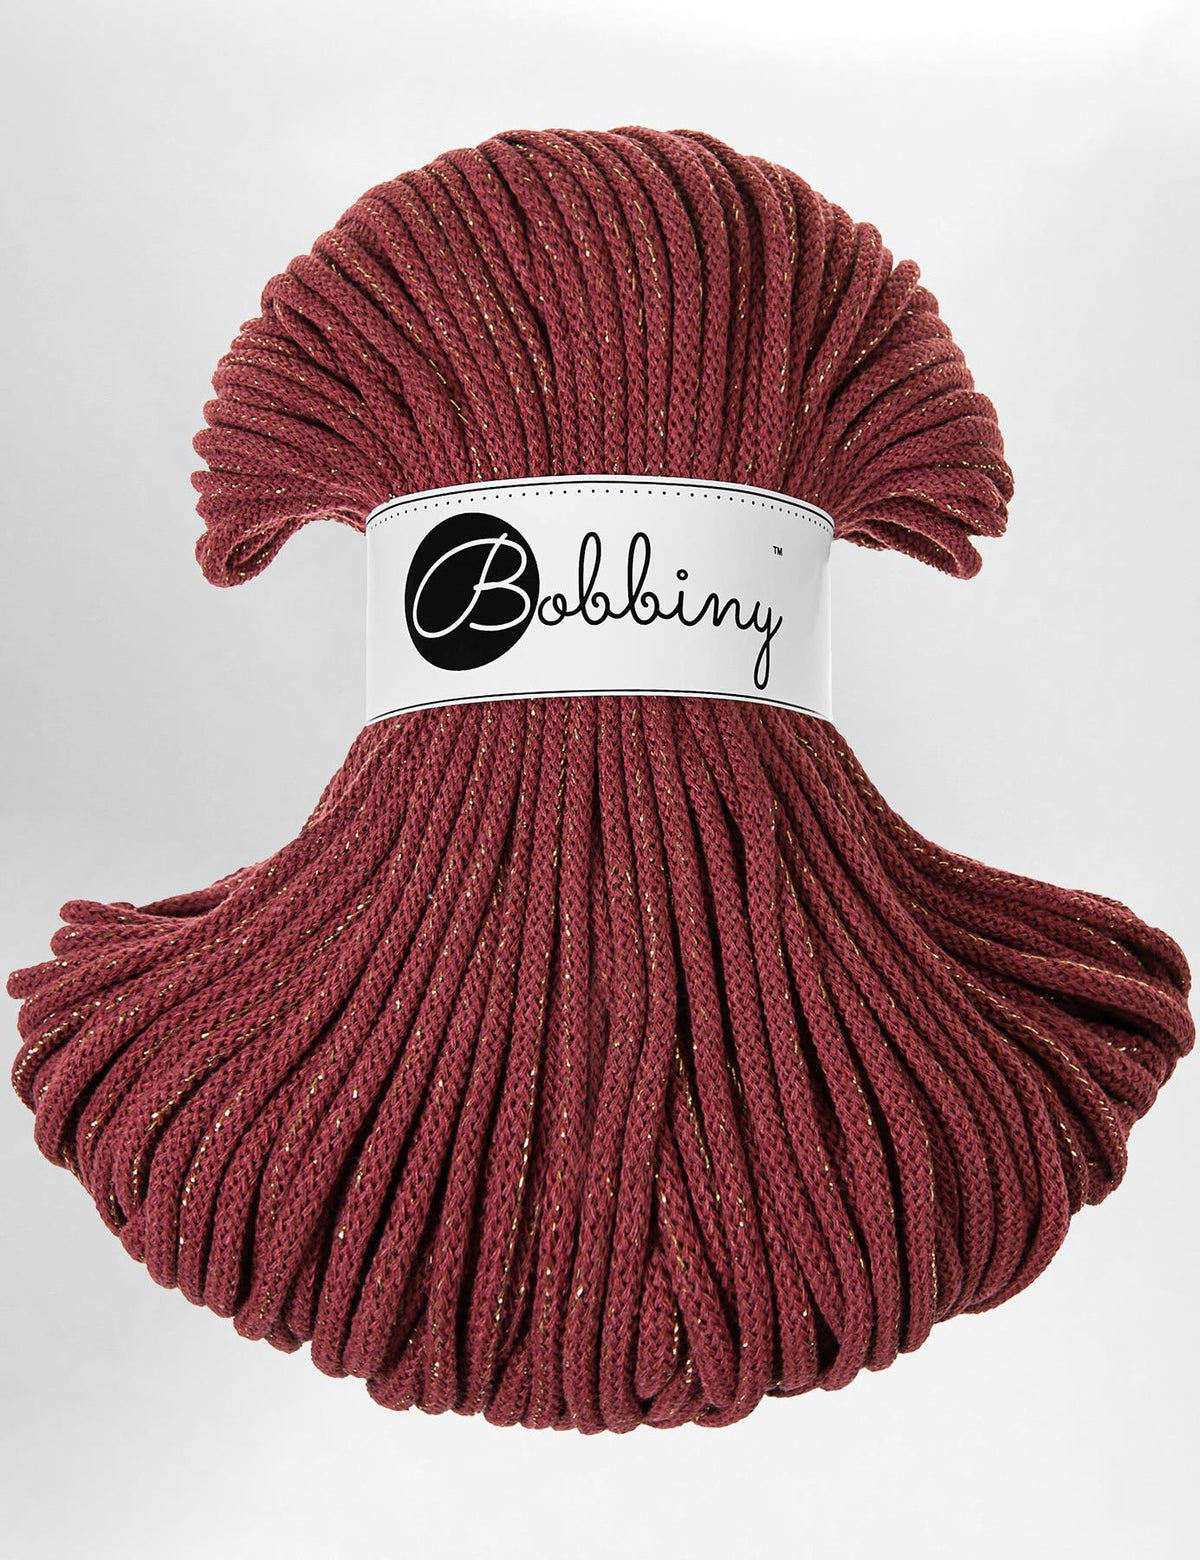 5mm Golden Wine Red recycled cotton macrame cord by Bobbiny (100m)